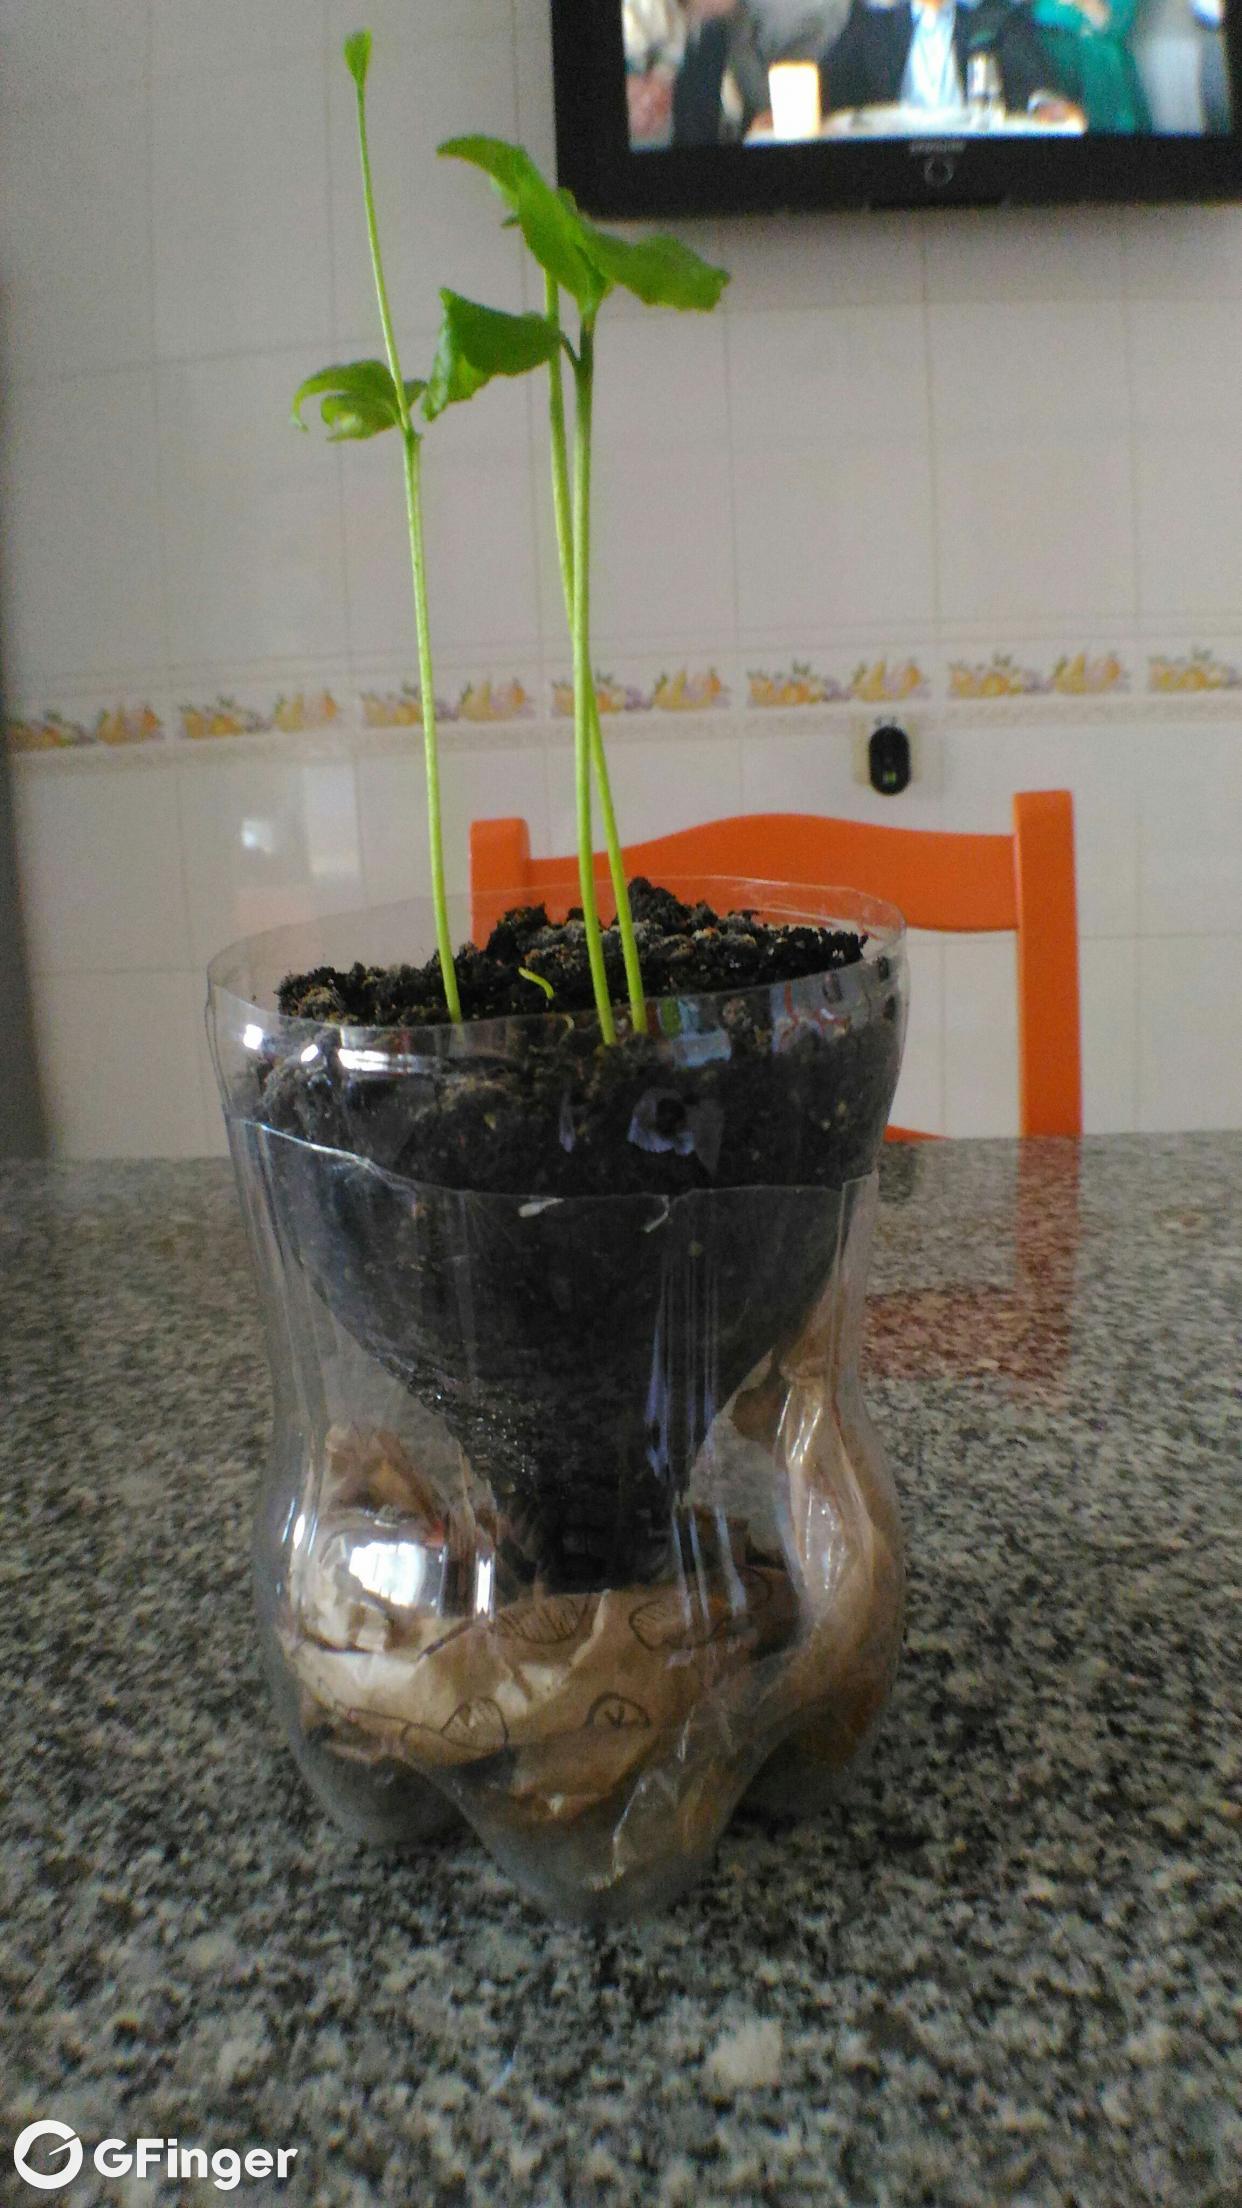 after 3 weeks planted in a botle of coke...